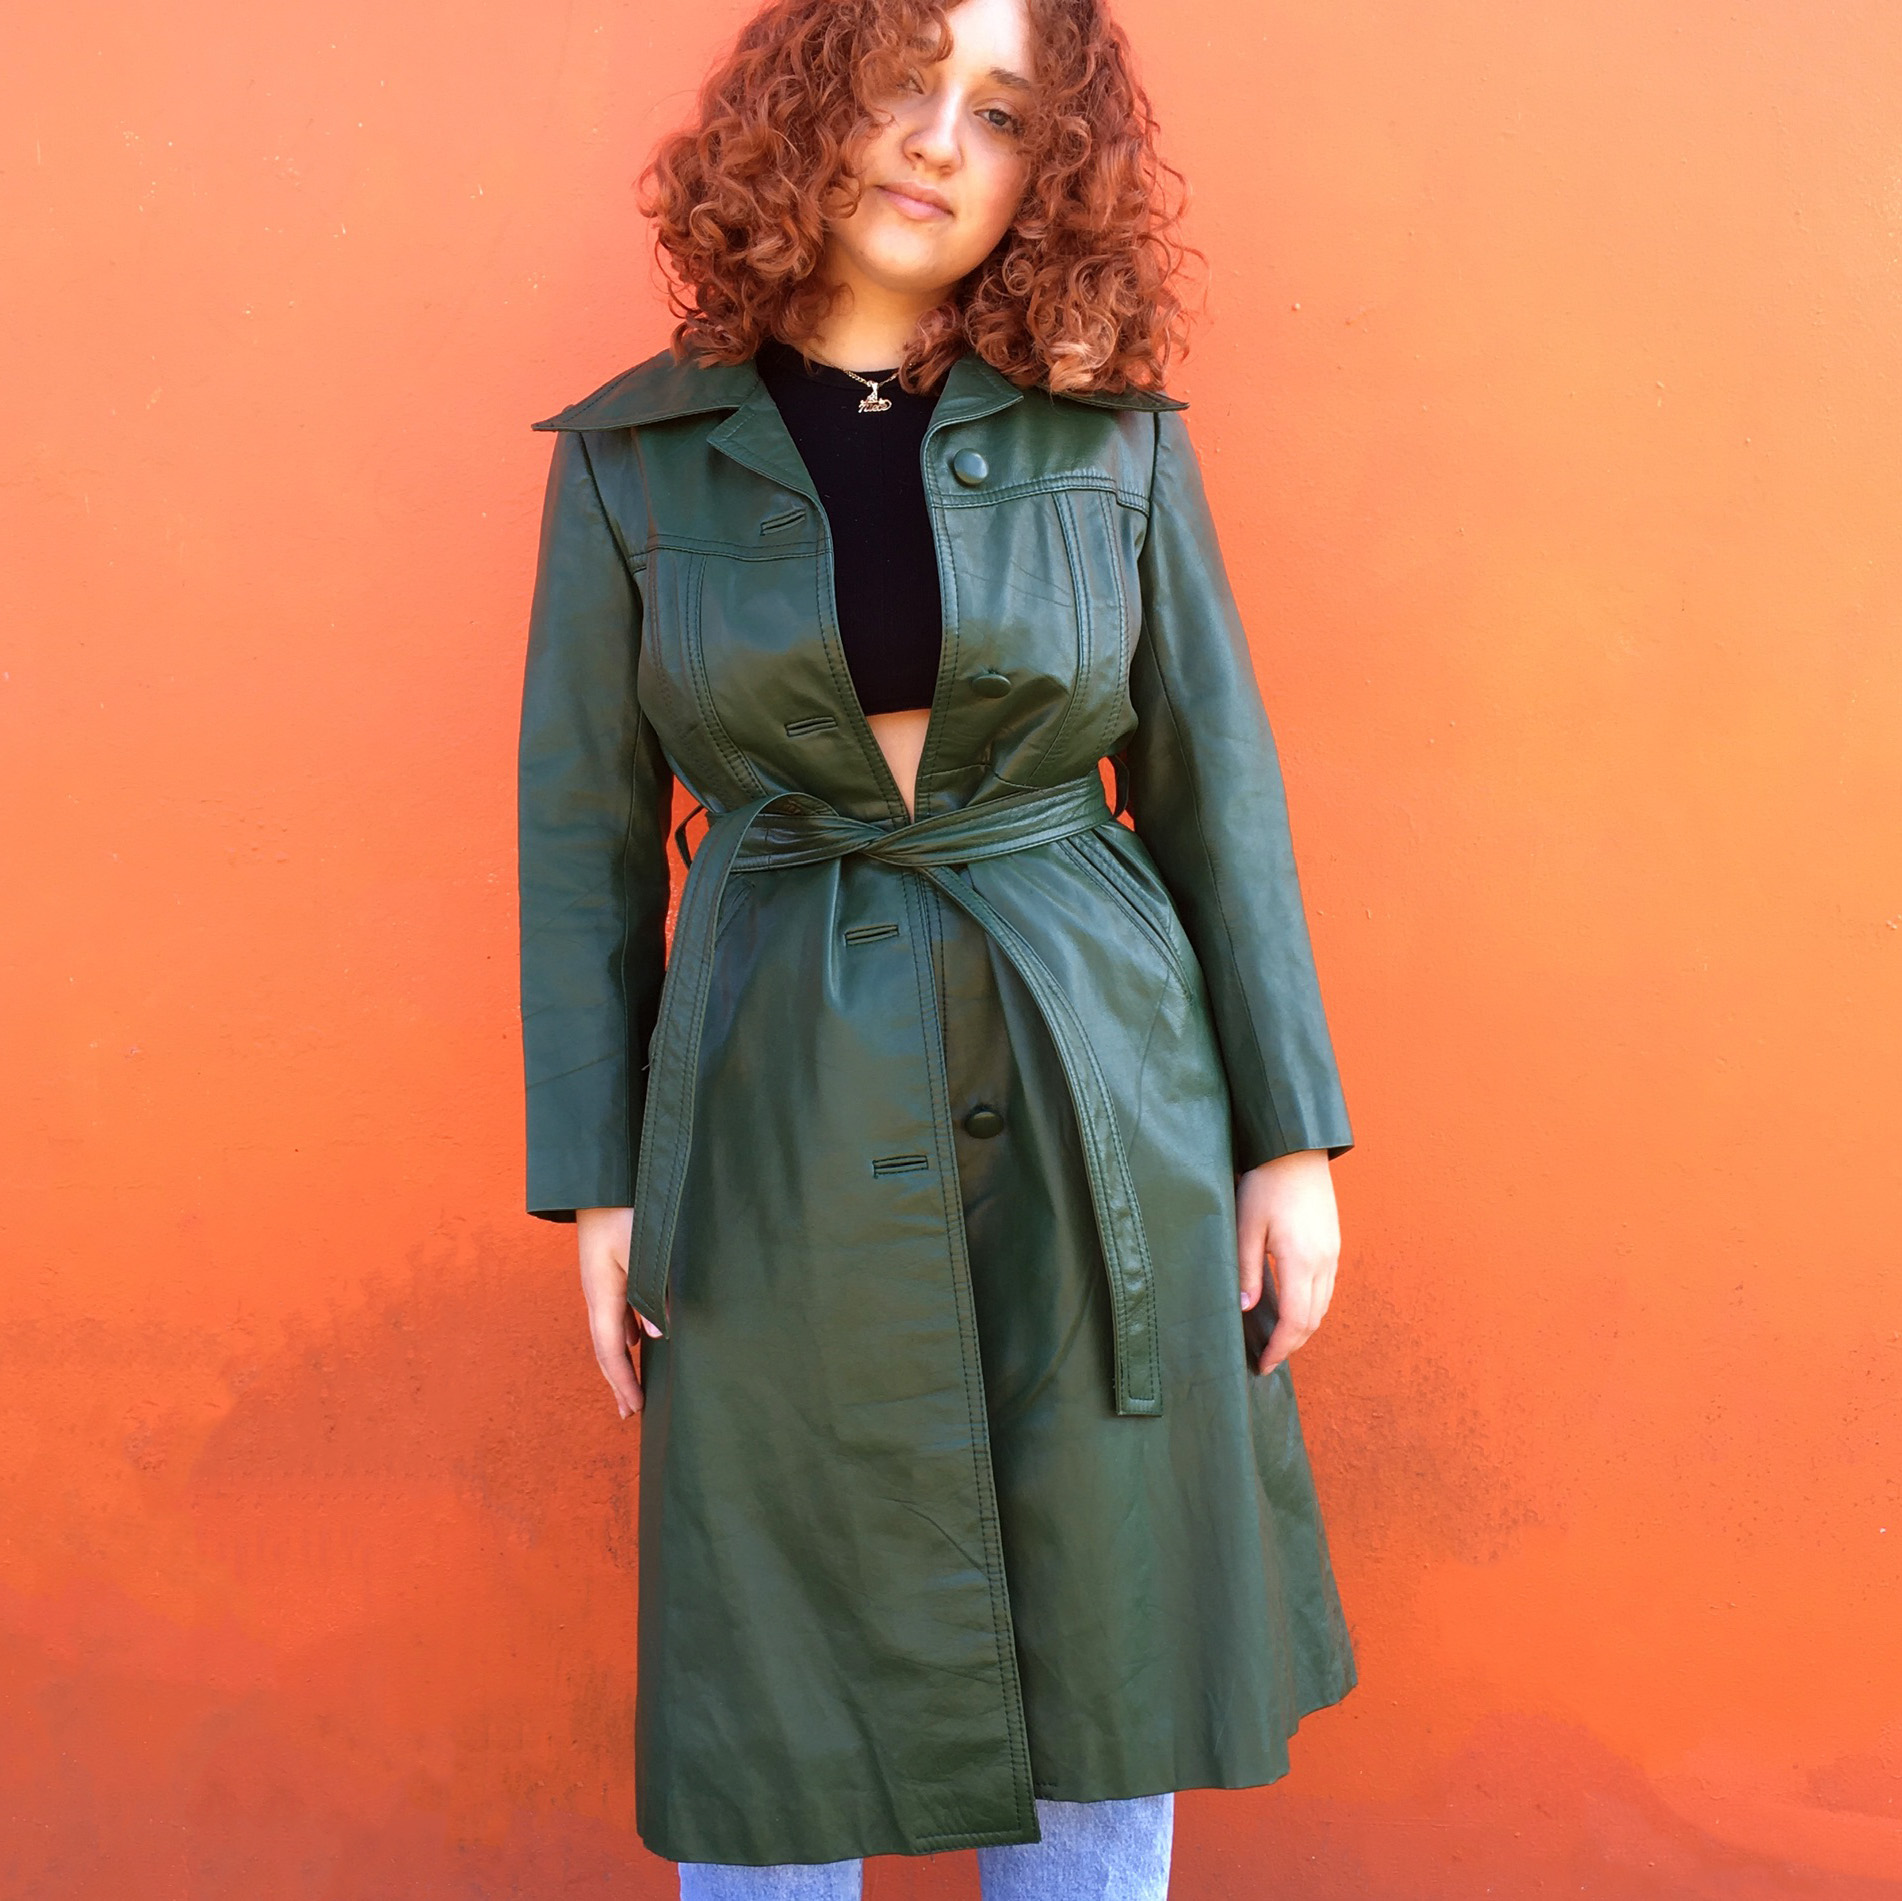 A person with curly red hair standing against an orange wall wearing a vintage green leather coat and black crop top